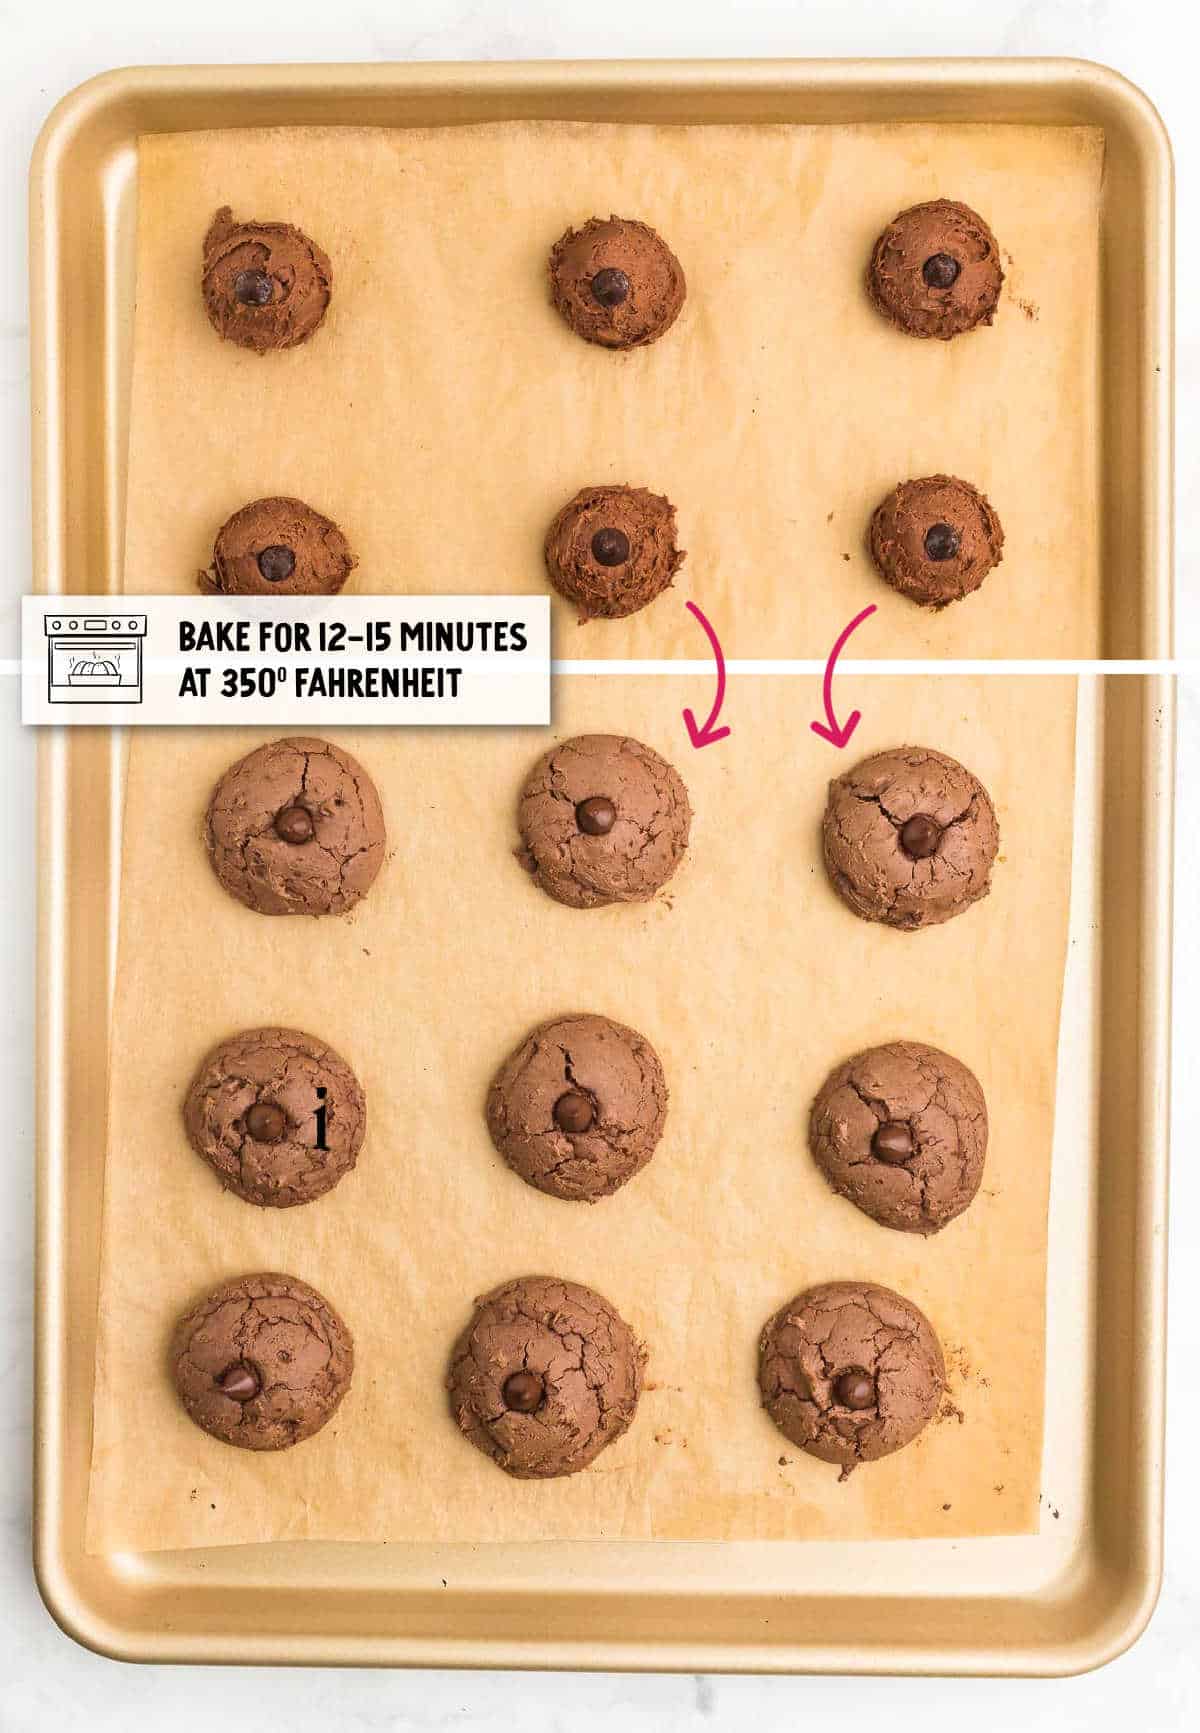 cookies before and after baking